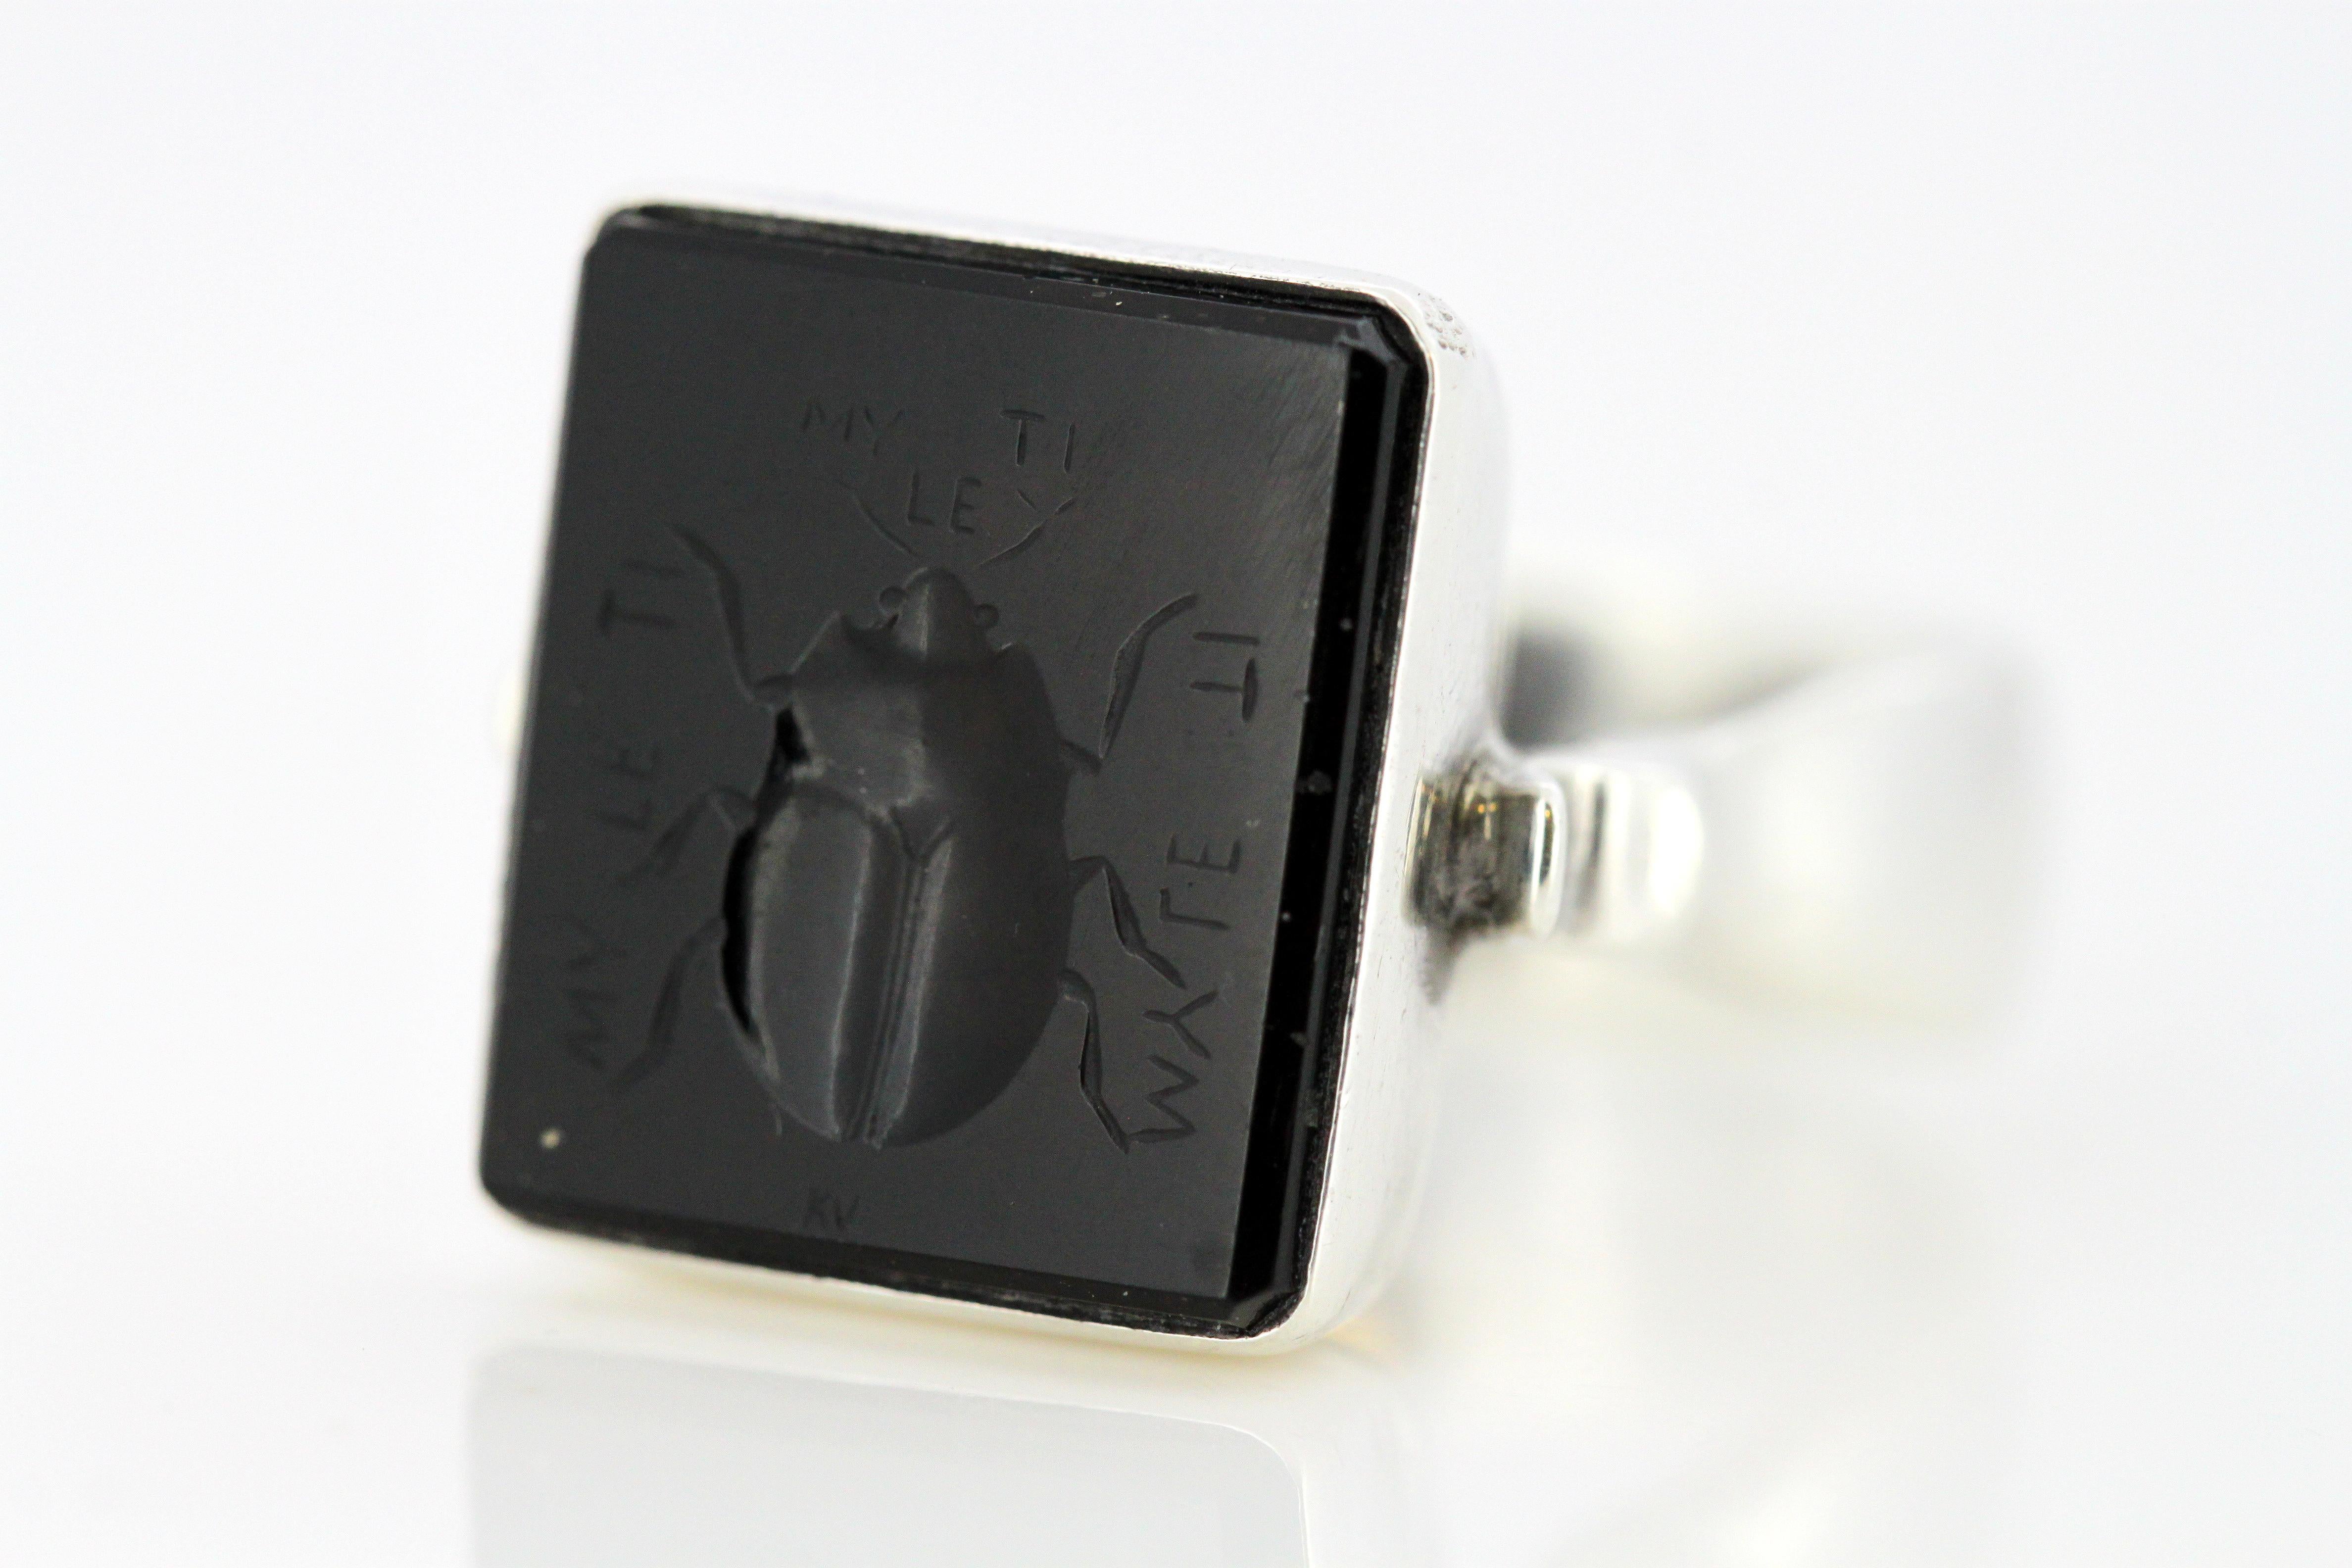 Vintage eastern European sterling silver signet ring with onyx scarab carving
Hallmarked 925
Maker : Unidentified
Circa 1950's

Dimensions -
Finger Size : (UK) = O (US) = 7 1/2 (EU) = 55 1/4
Size : 3.15 x 2.1 x 1.7 cm
Weight: 10 grams